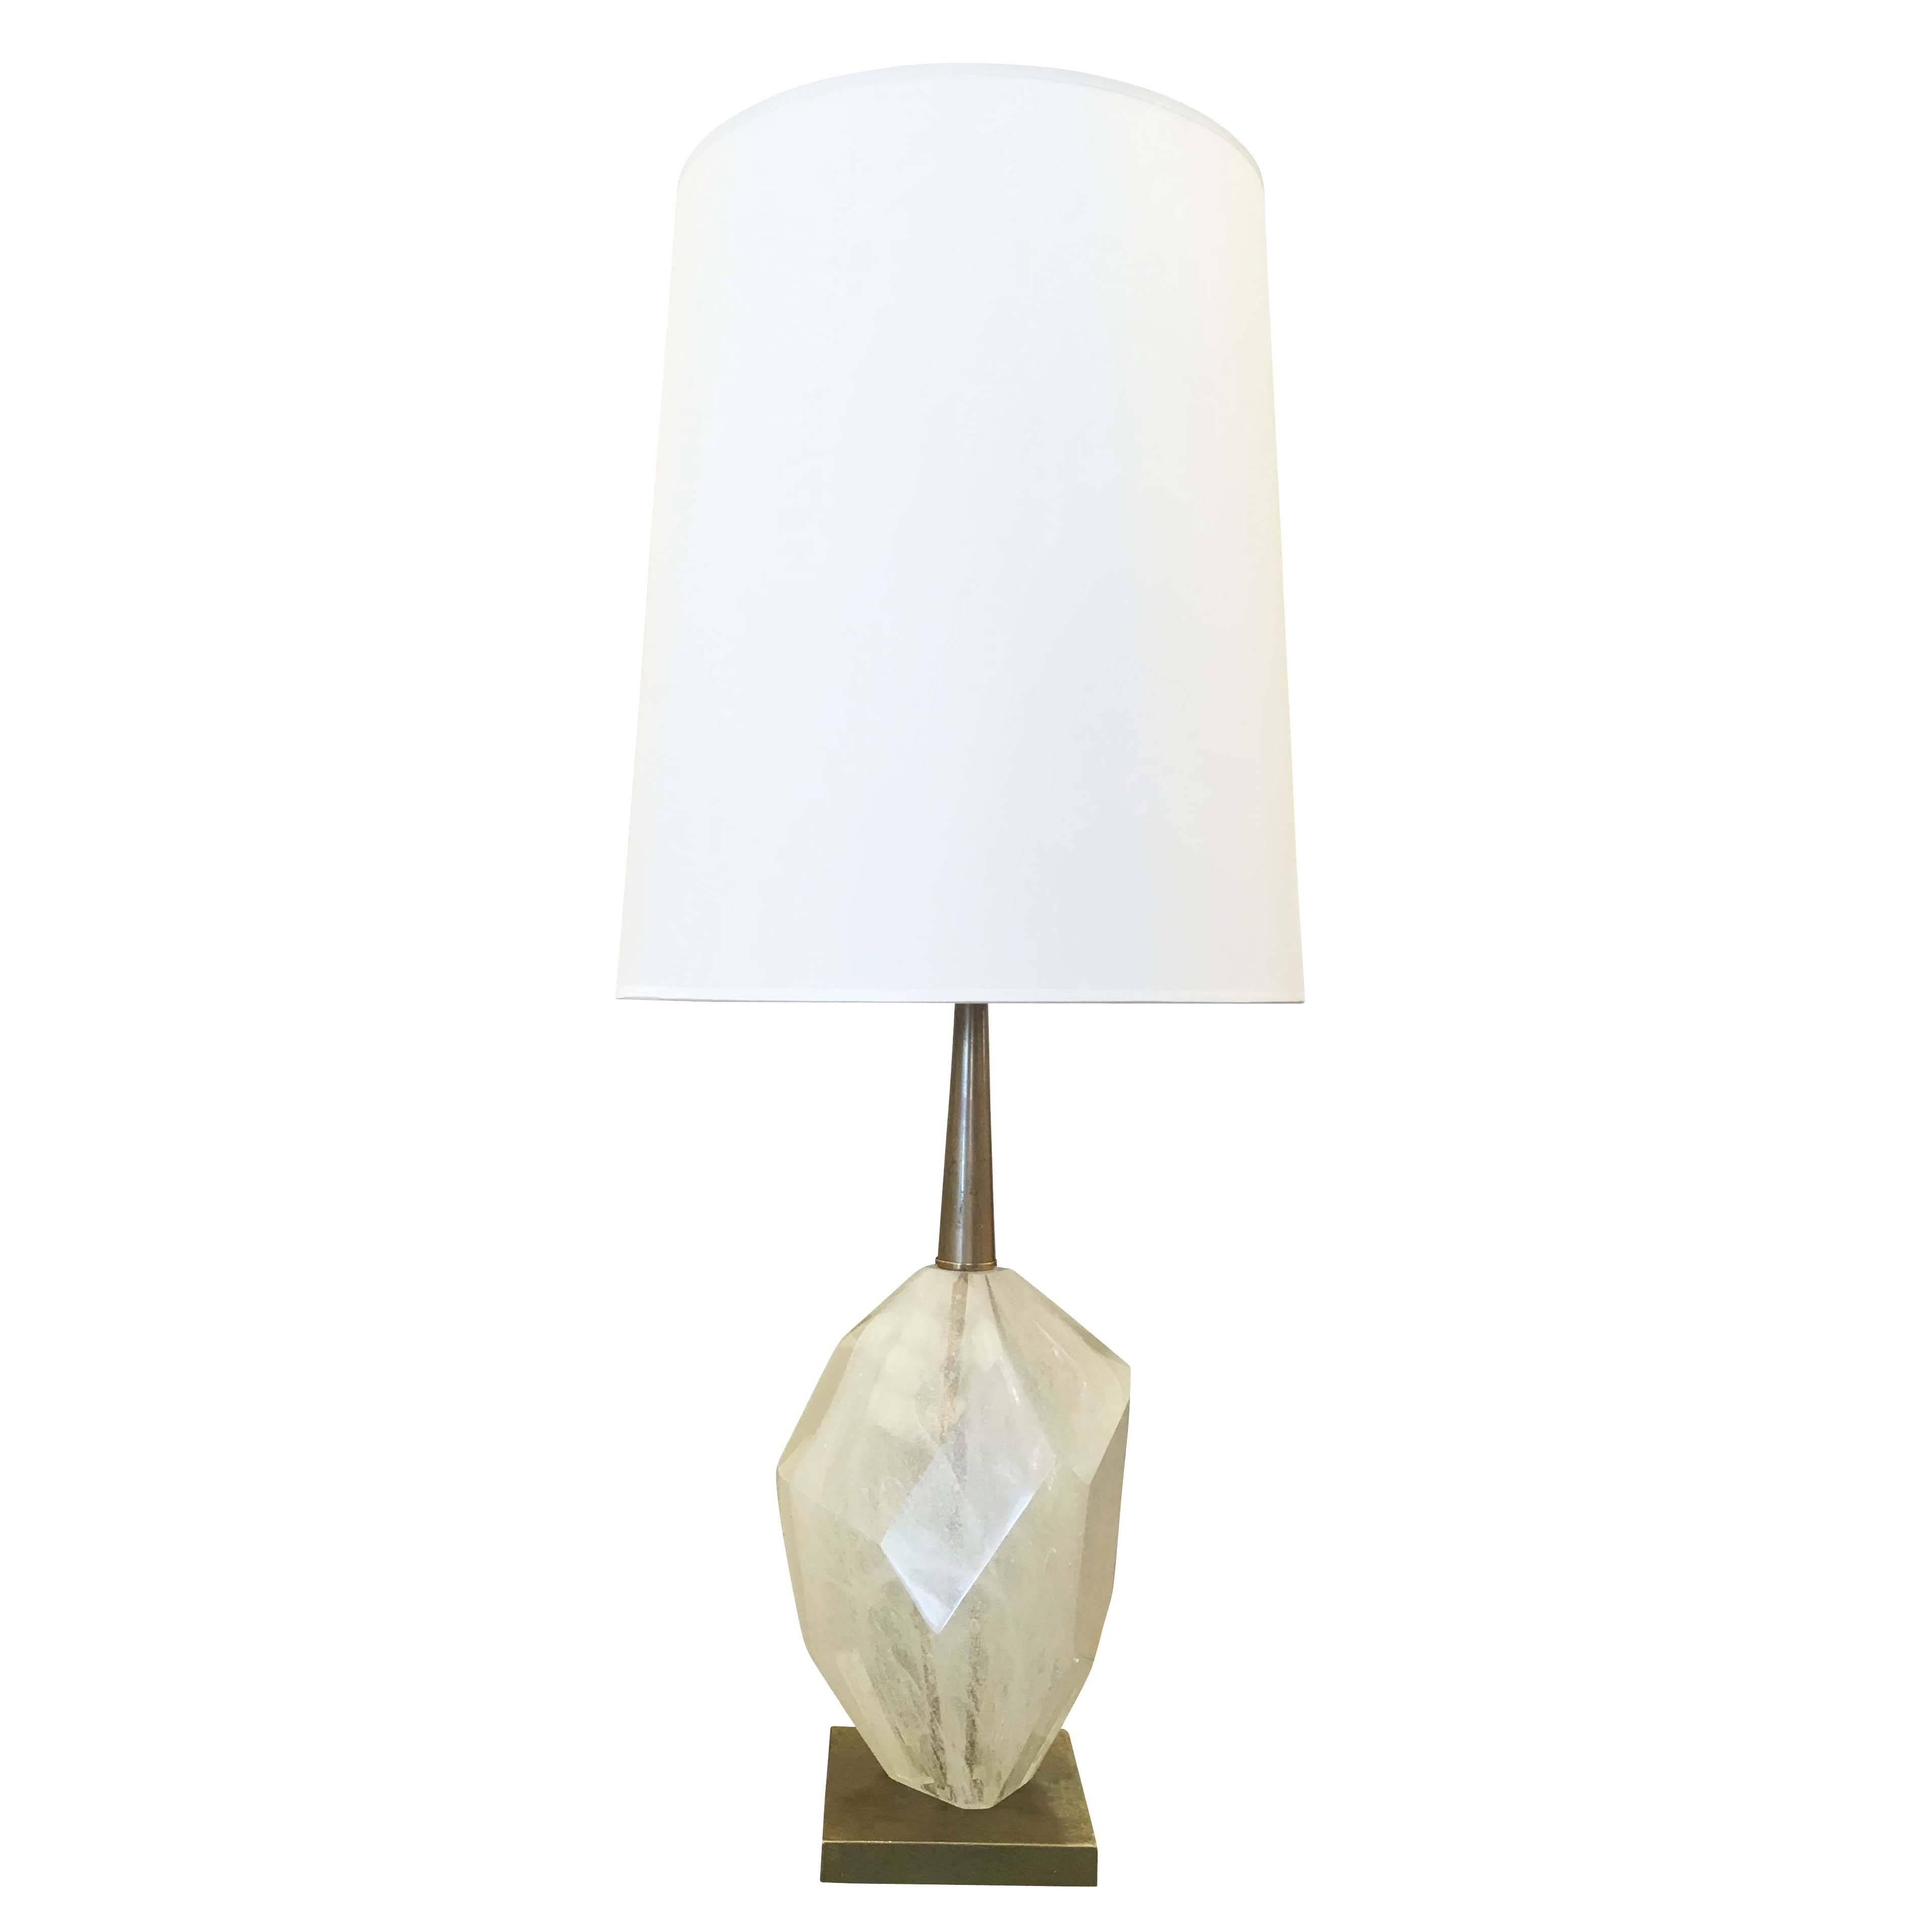 Limited Edition Glass Crystal Table Lamp by Gaspare Asaro Studio-Short Version